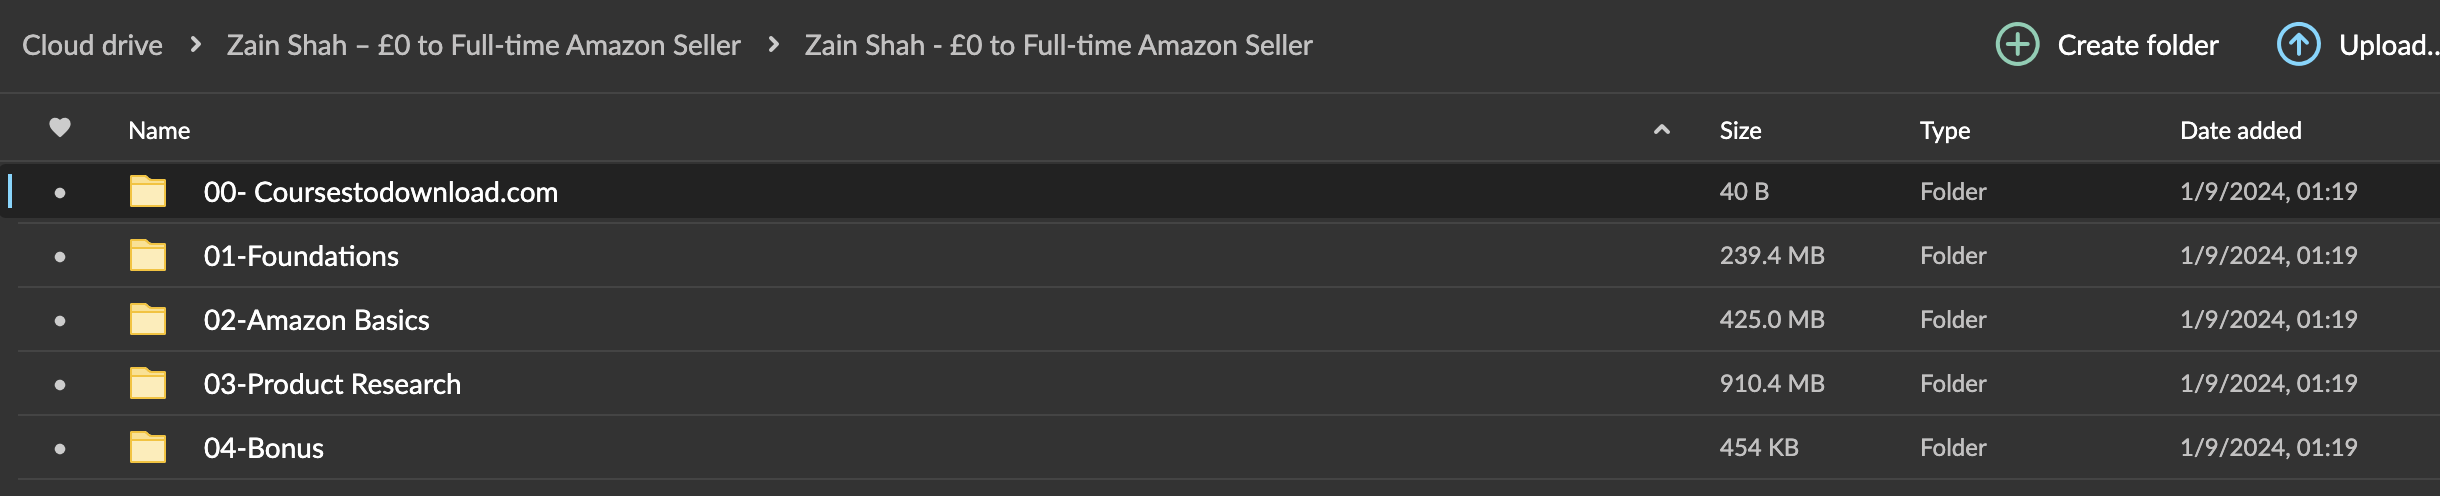 Zain Shah – £0 to Full-time Amazon Seller Download